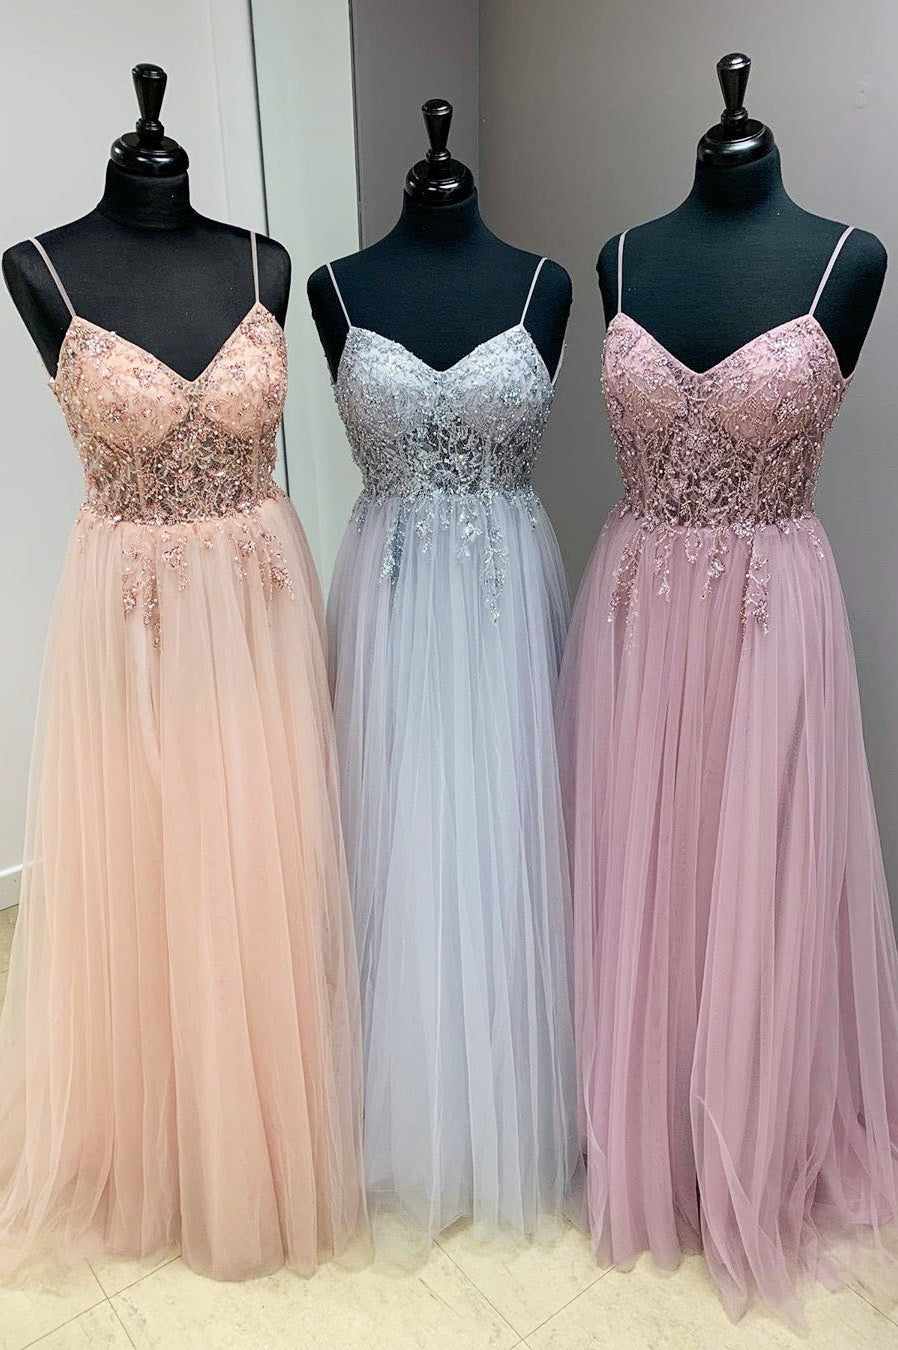 New Style Prom Dress 2020, Prom Dresses, Evening Dress, Dance Dress, Graduation School Party Gown, PC0373 - Promcoming